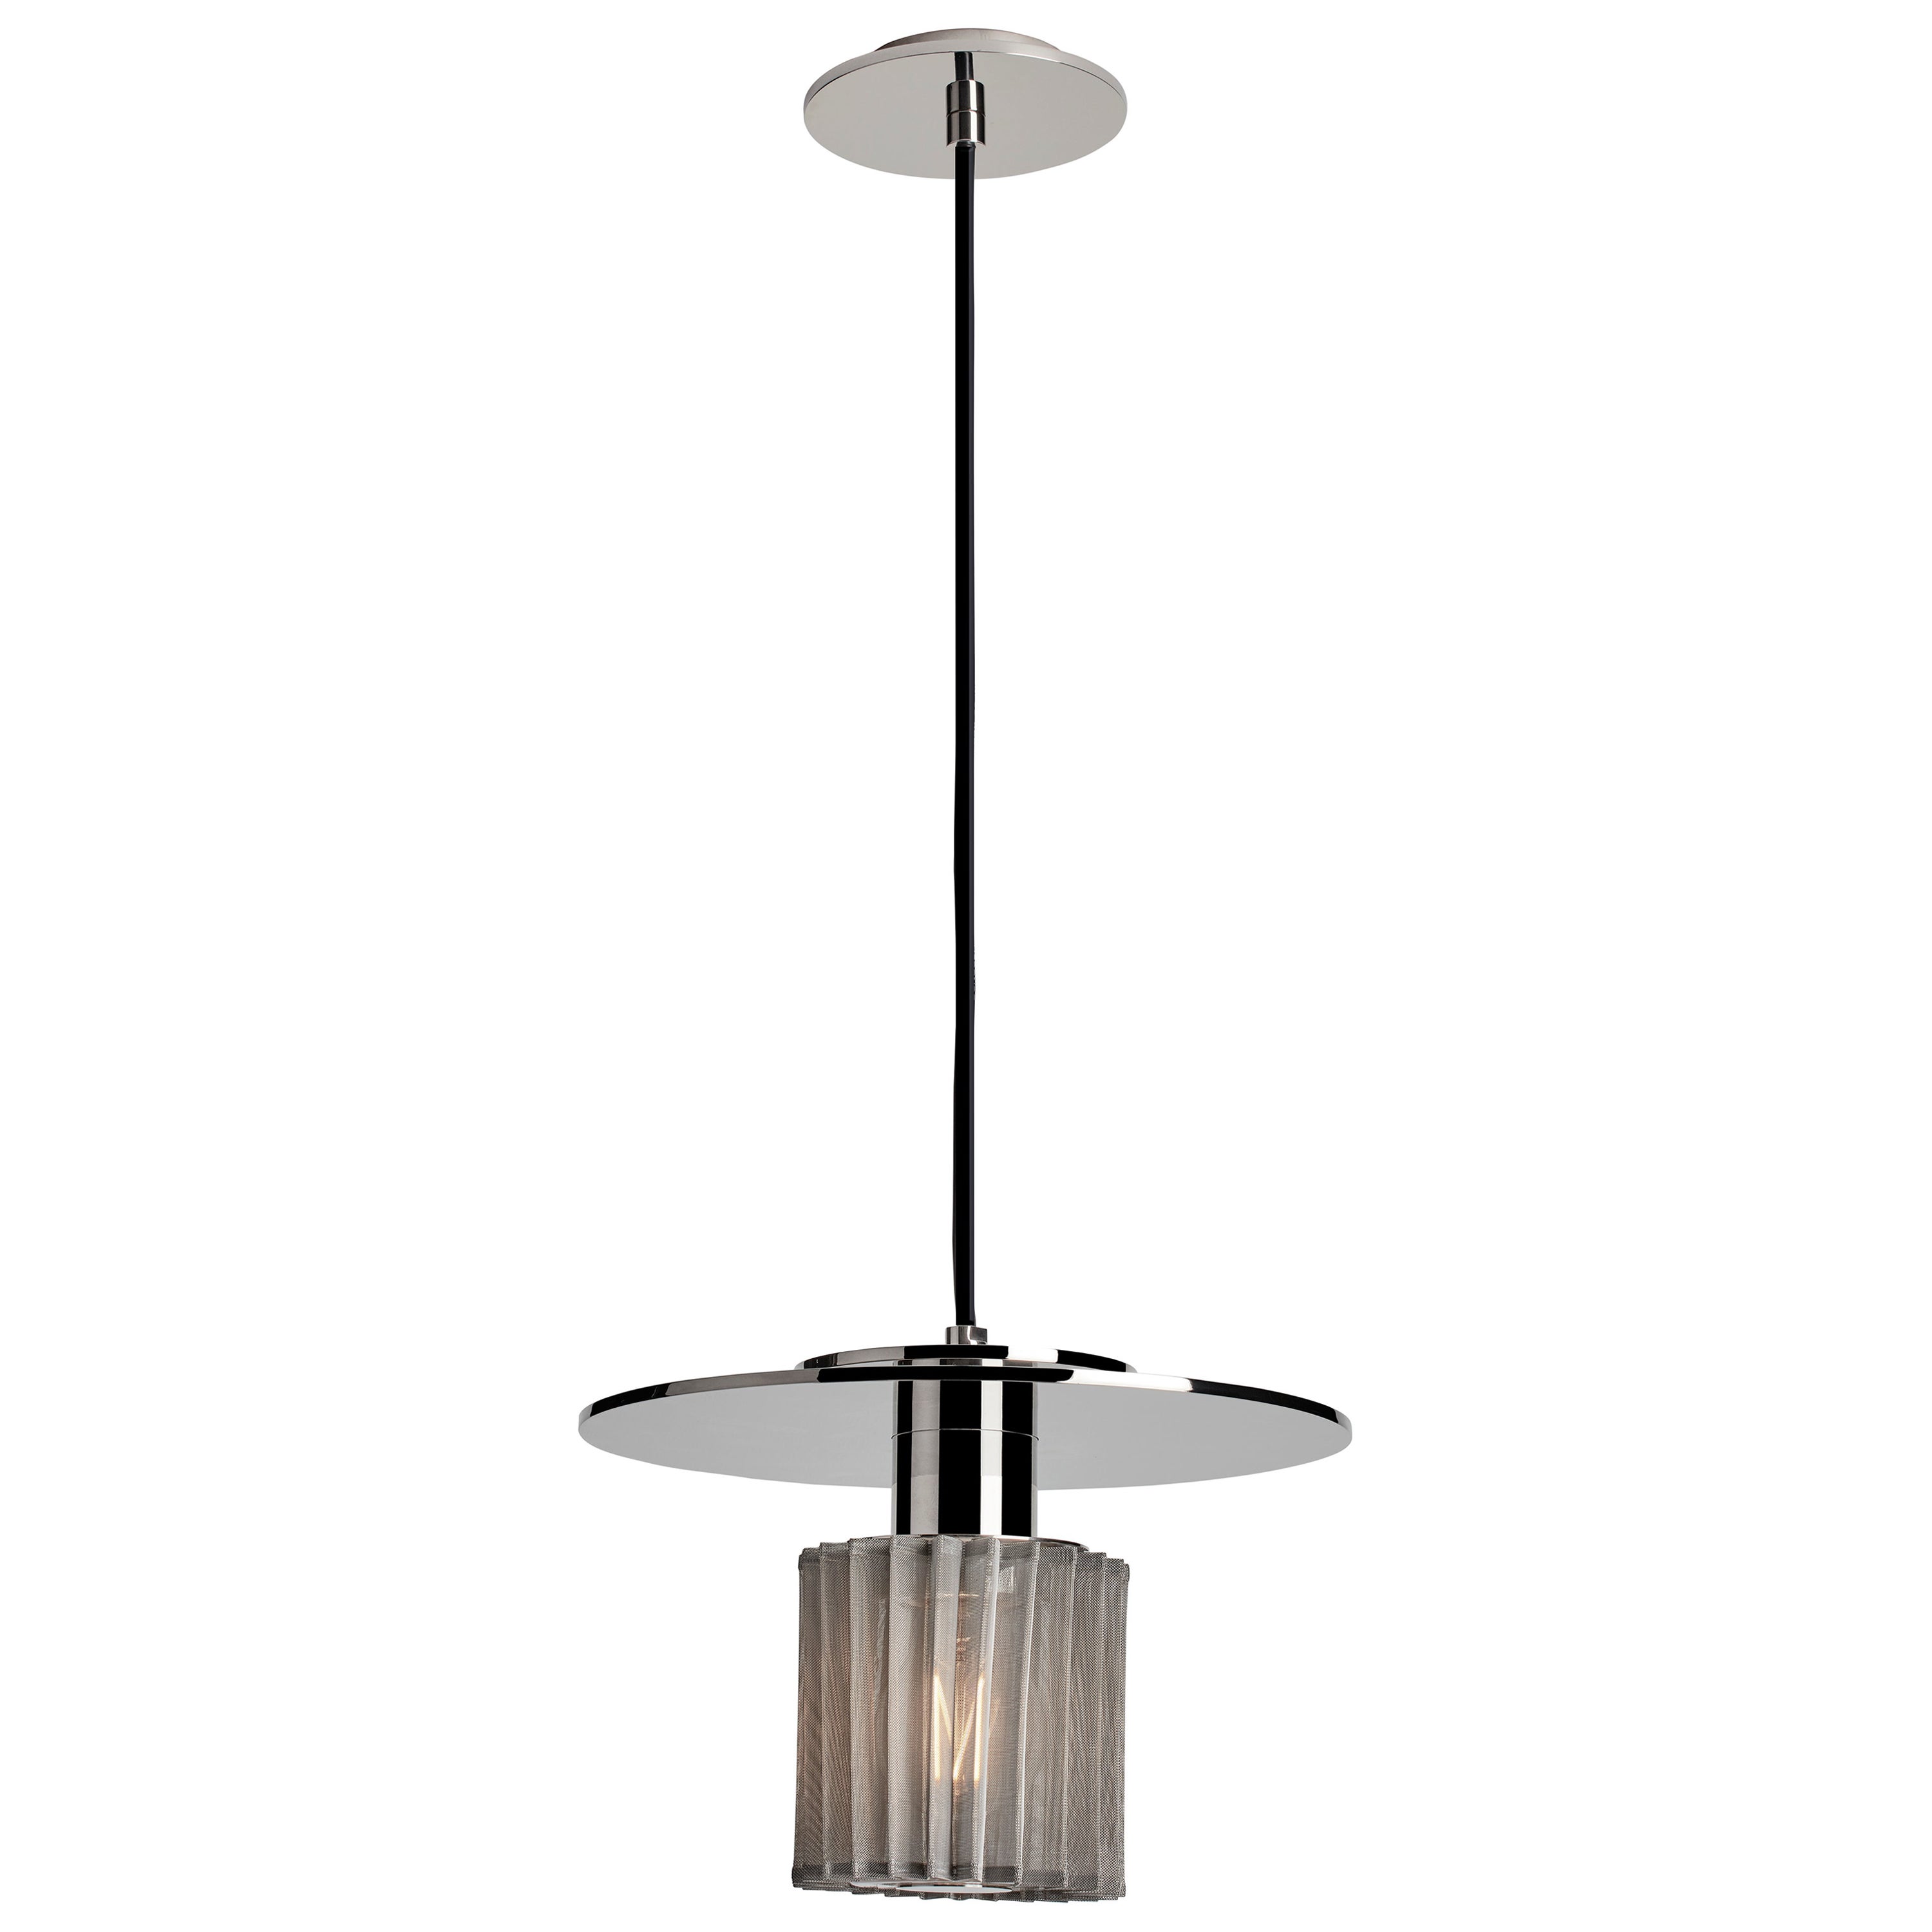 DCW Editions Medium In The Sun Pendant Lamp in Silver Steel Body w/Silver Mesh For Sale